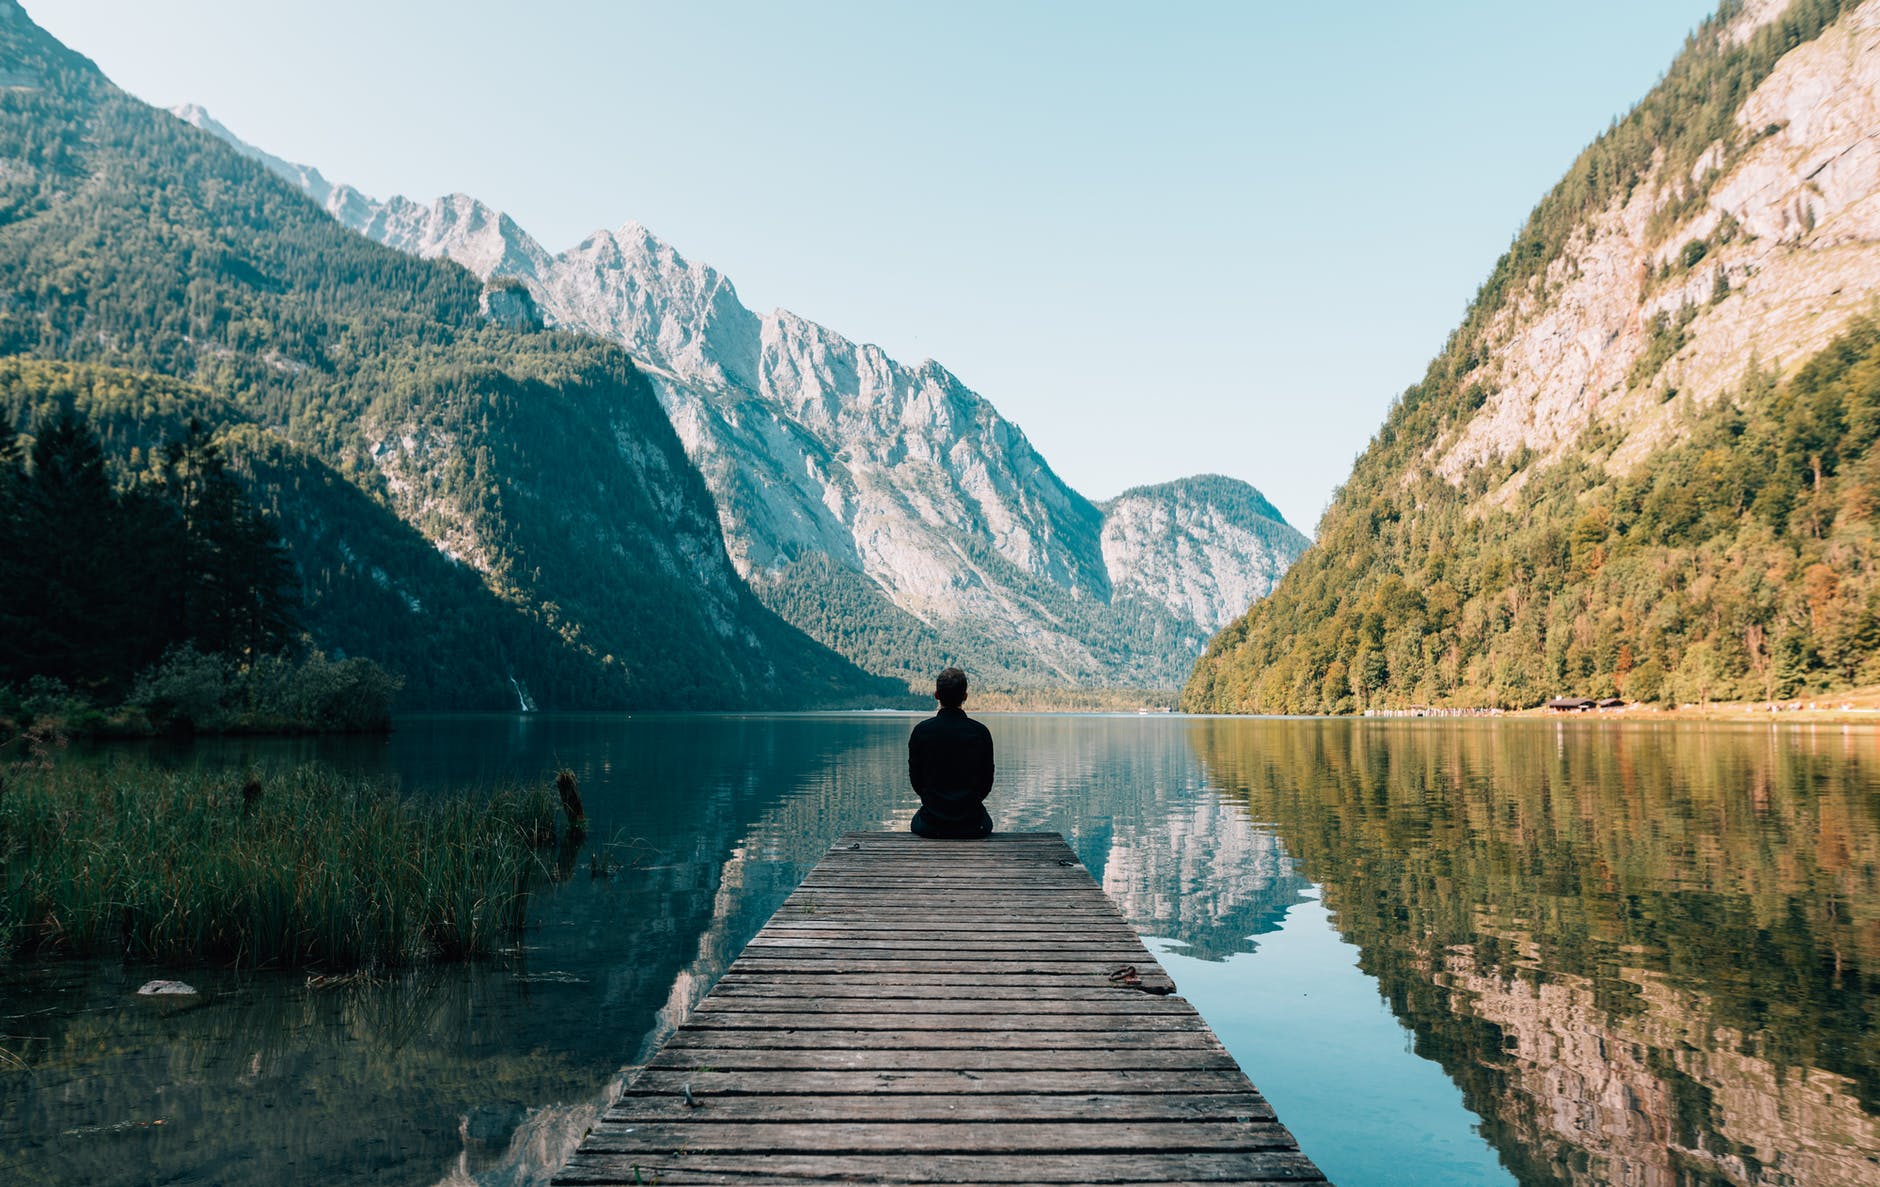 Man meditating in the mountains.